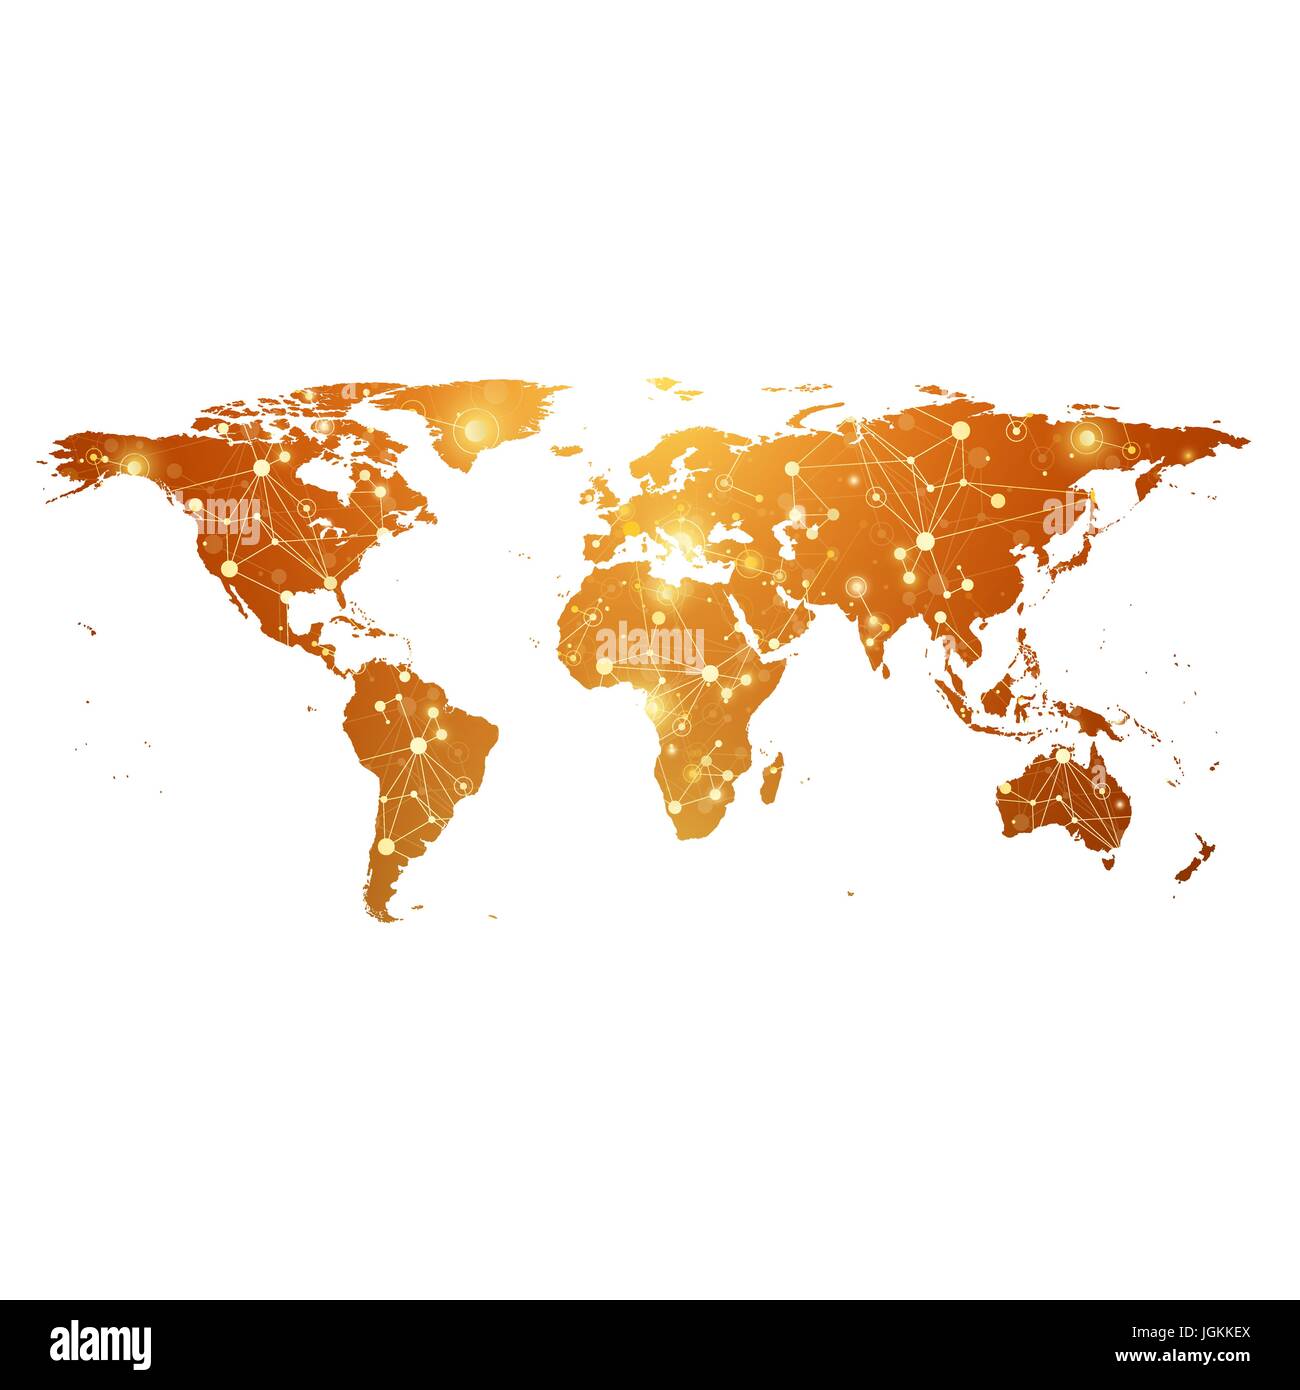 Golden World Map with global technology networking concept. Digital data visualization. Scientific cybernetic particle compounds. Big Data background communication. Vector illustration. Stock Vector